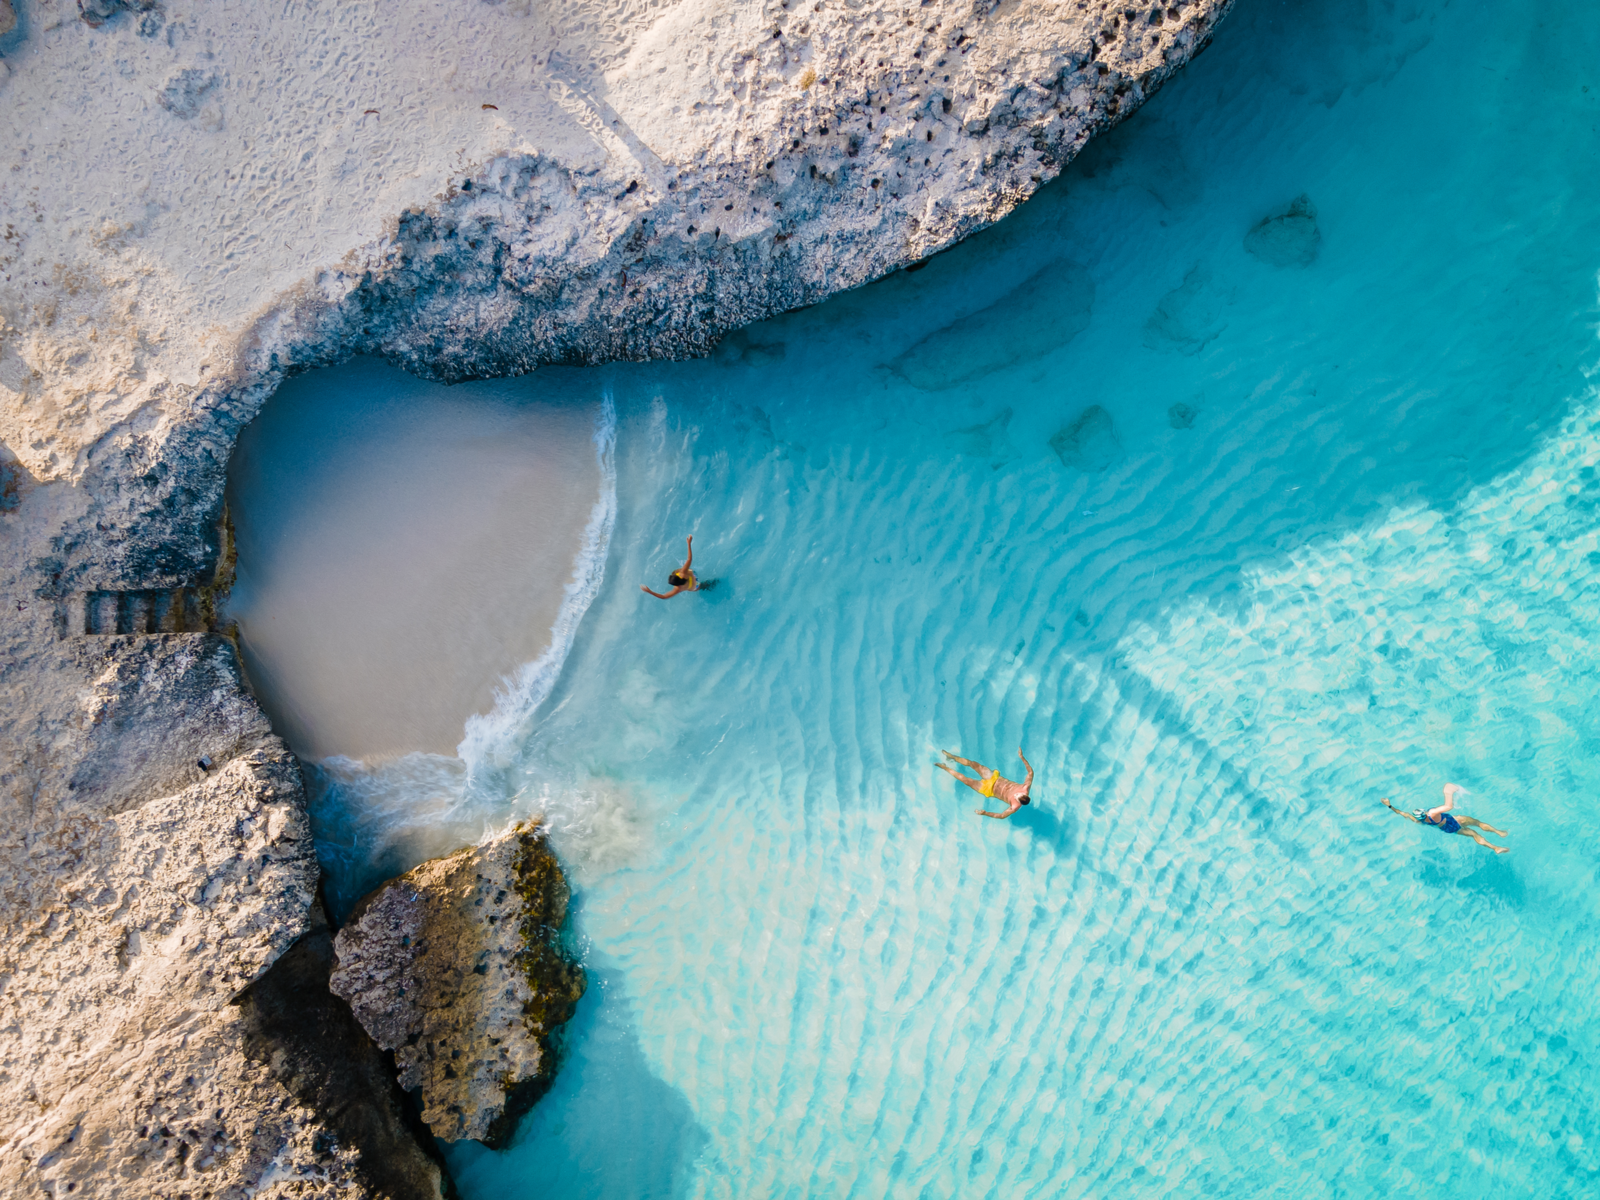 Overhead view of three people swimming on the crystal clear calm waters of a rocky coast in Triple Steps Beach, one of the best beaches in Aruba, during a bright day